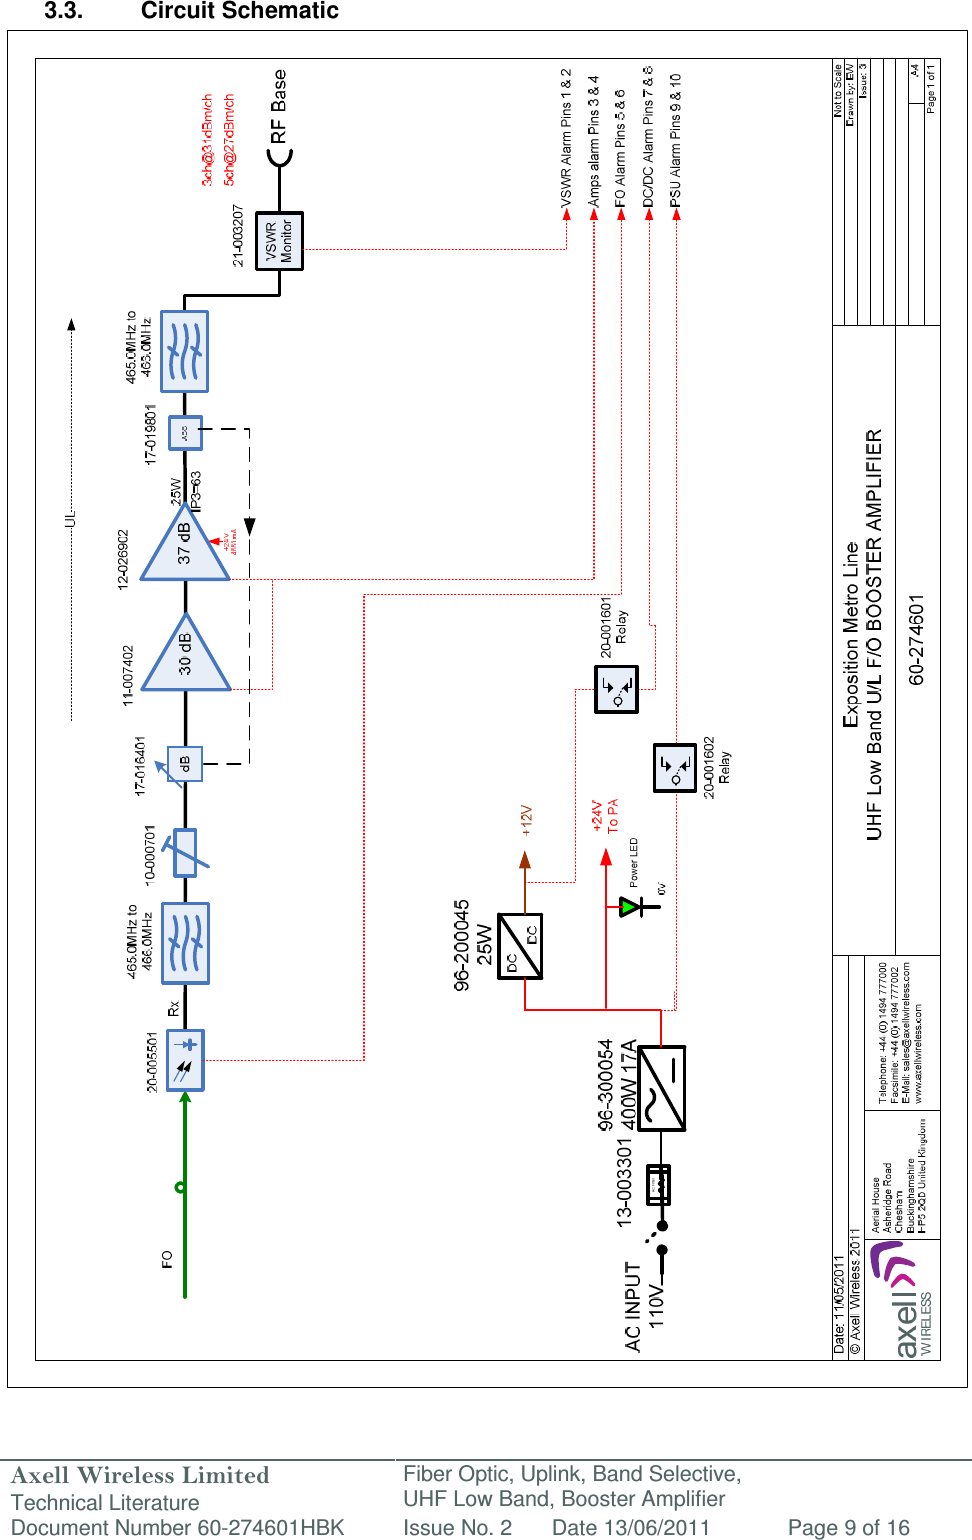 Axell Wireless Limited Technical Literature Fiber Optic, Uplink, Band Selective,  UHF Low Band, Booster Amplifier Document Number 60-274601HBK Issue No. 2 Date 13/06/2011 Page 9 of 16   3.3.  Circuit Schematic                                                         